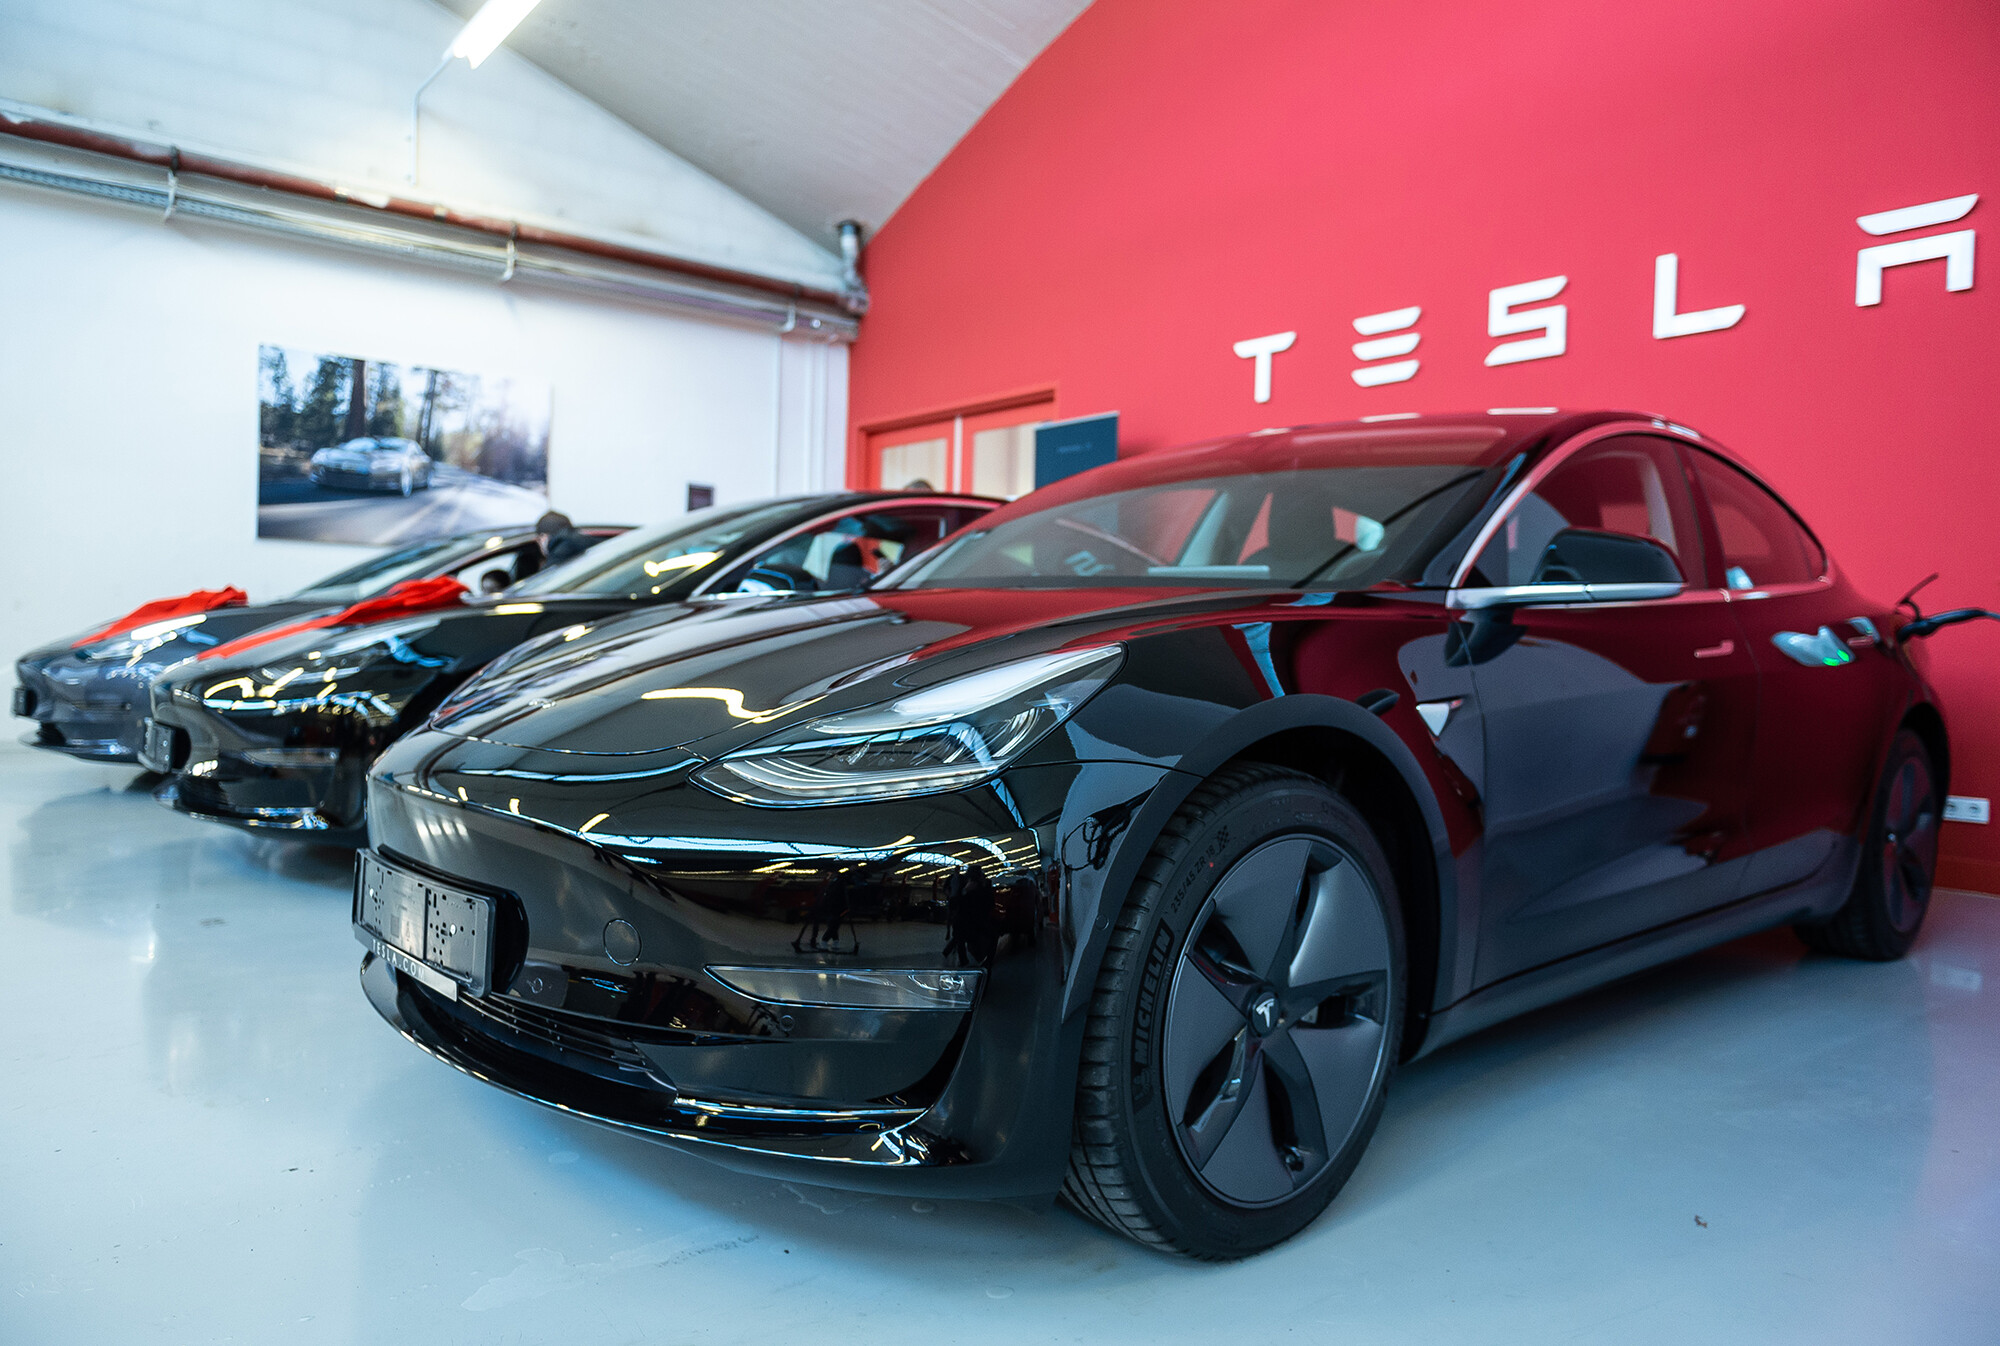 Tesla reports record profit, sees more supply chain woes in 2022